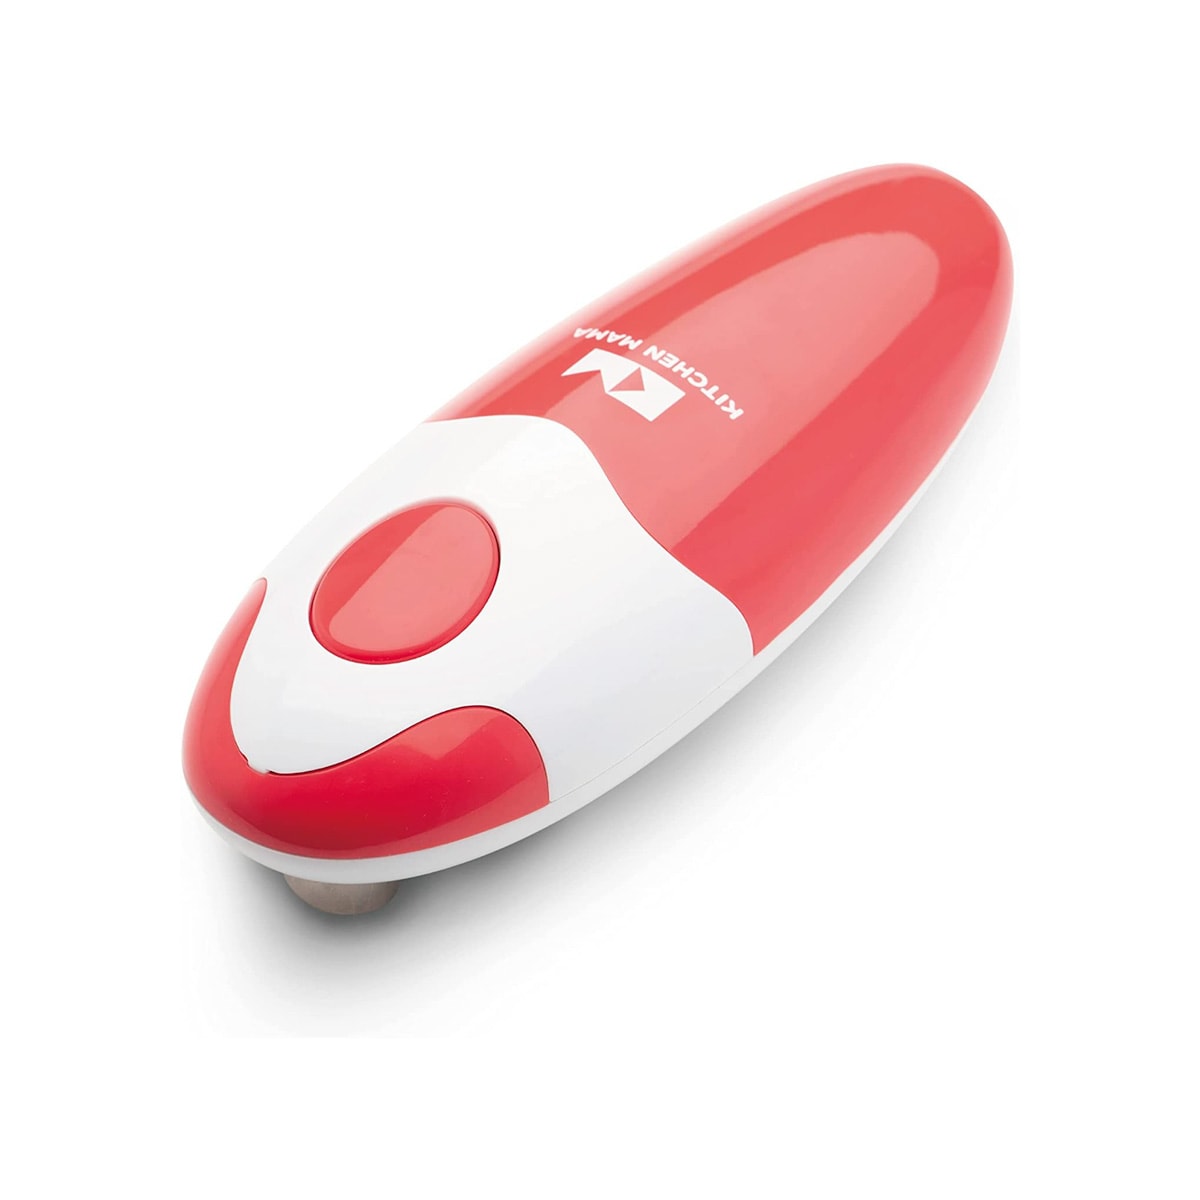 A red and white oval-shaped electric can opener.